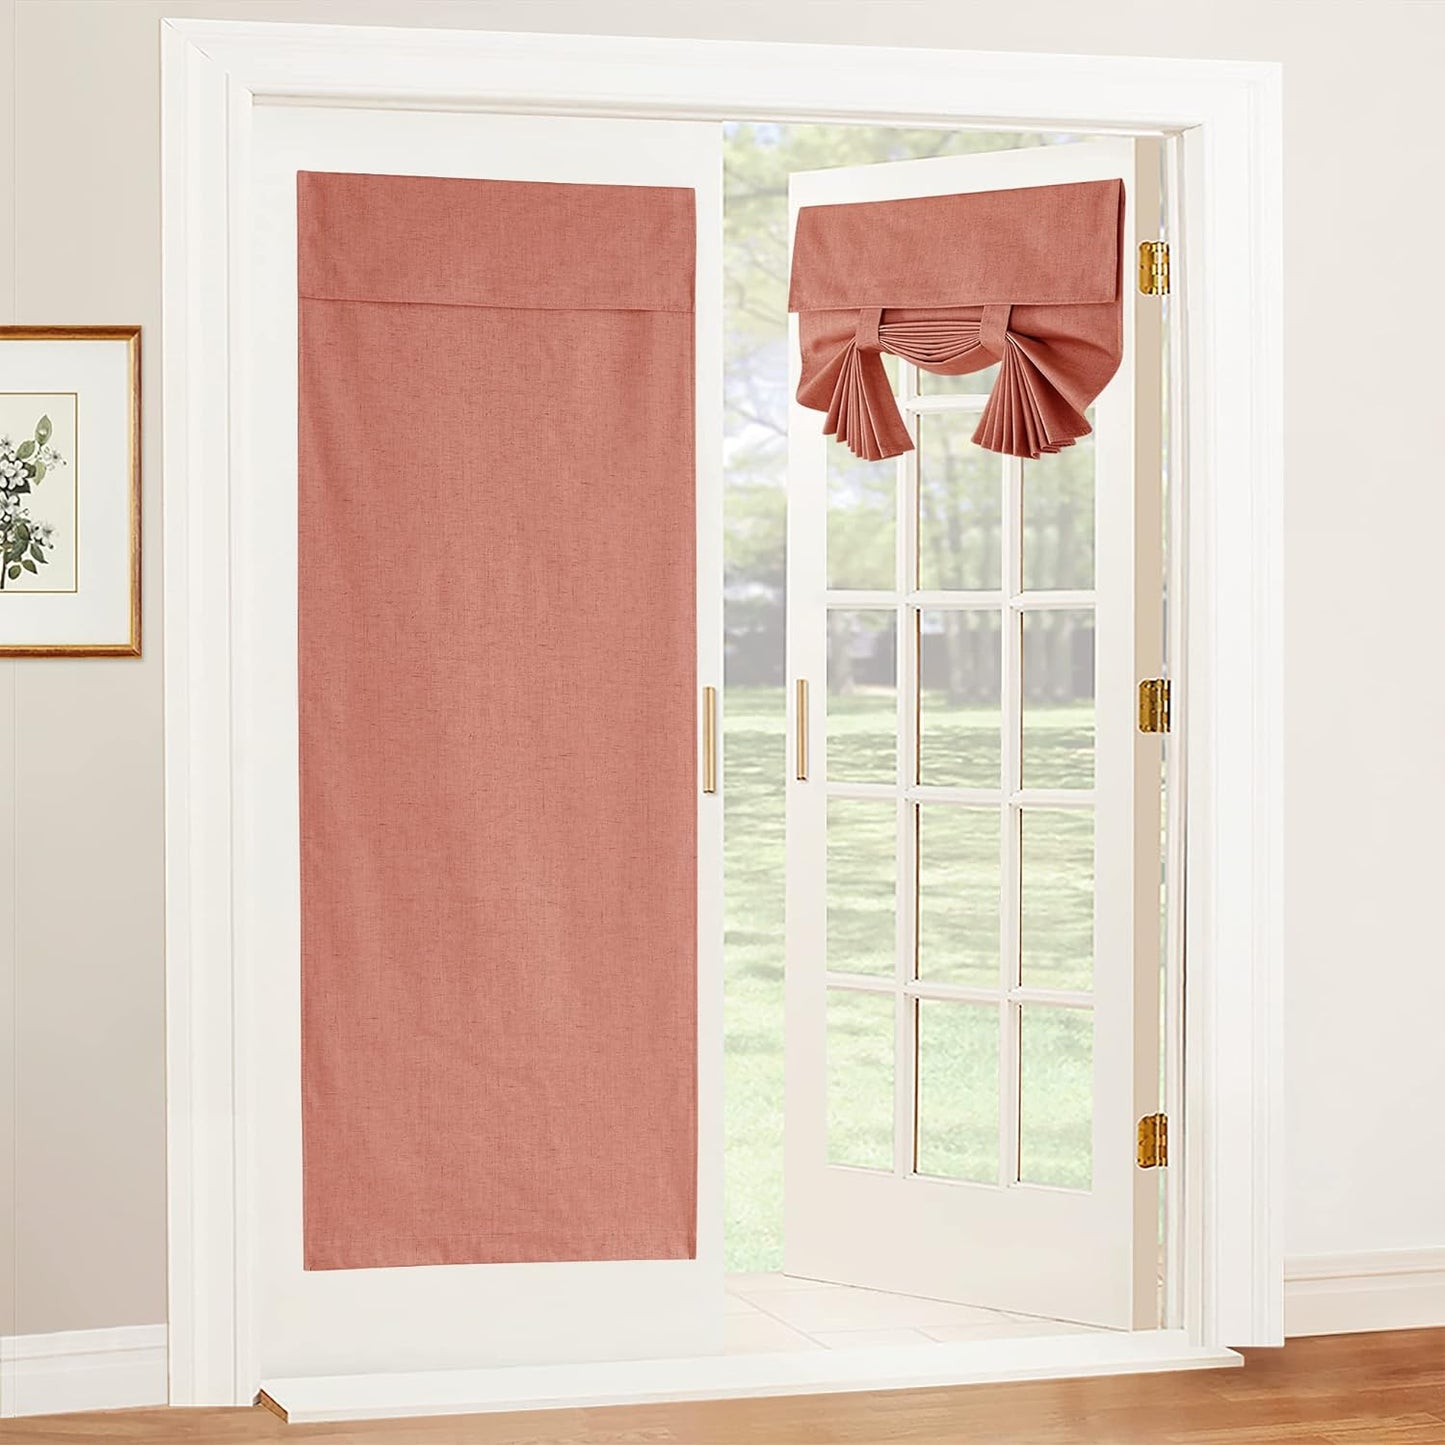 RYB HOME Blackout French Door Curtains, Room Darkening Shades Small Door Window Curtains and Drapes Thermal Insulated Tricia Door Blinds for Patio Door Doorway, W26 X L40 Inch, 1 Panel, Gray  RYB HOME Brick Red 34" X 69" 